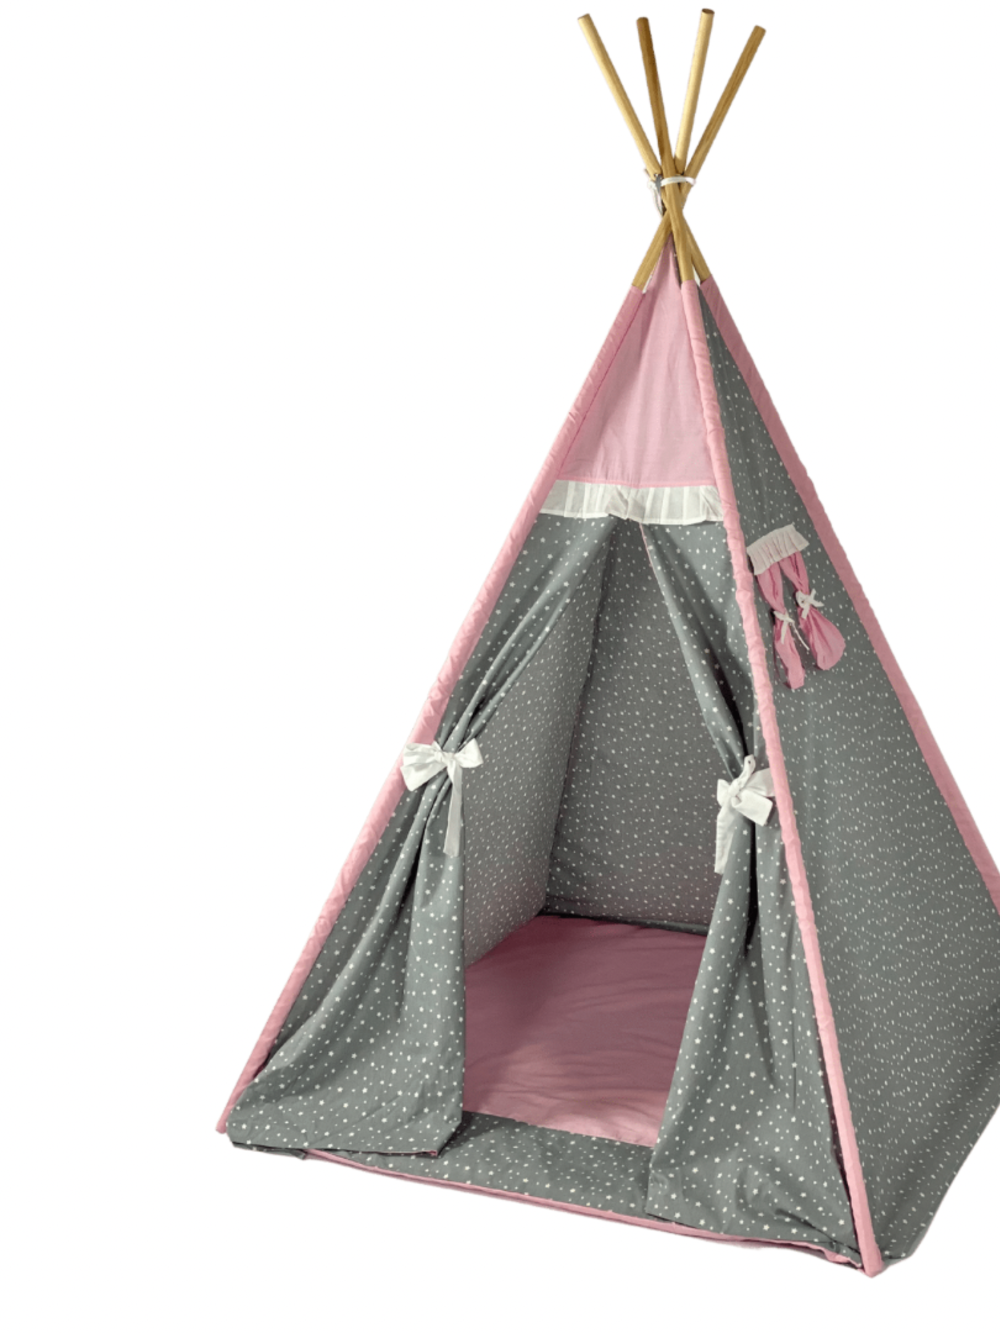 Children's Tent - teepee tent Pink and Stars